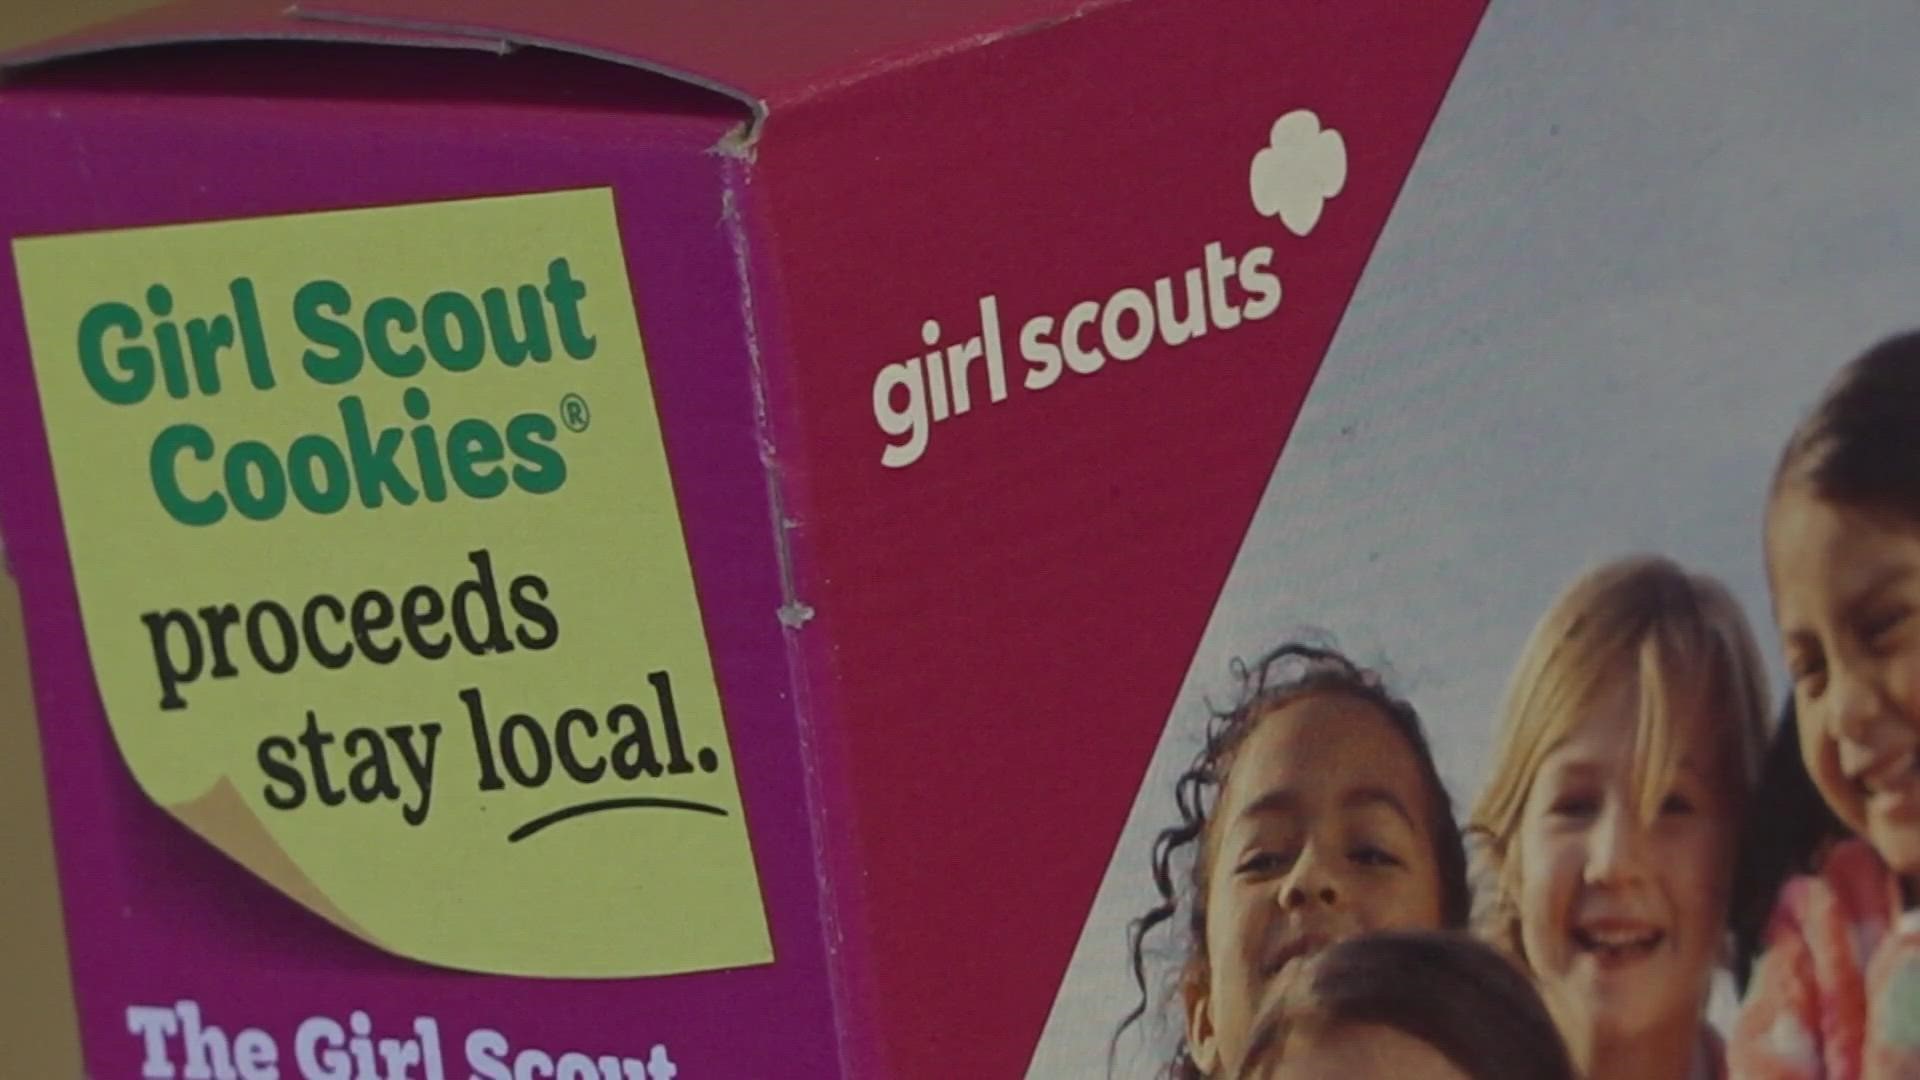 Girl Scout Cookie season has begun! The Girl Scouts of the Southern Appalachians began picking up their orders so they can start deliveries.